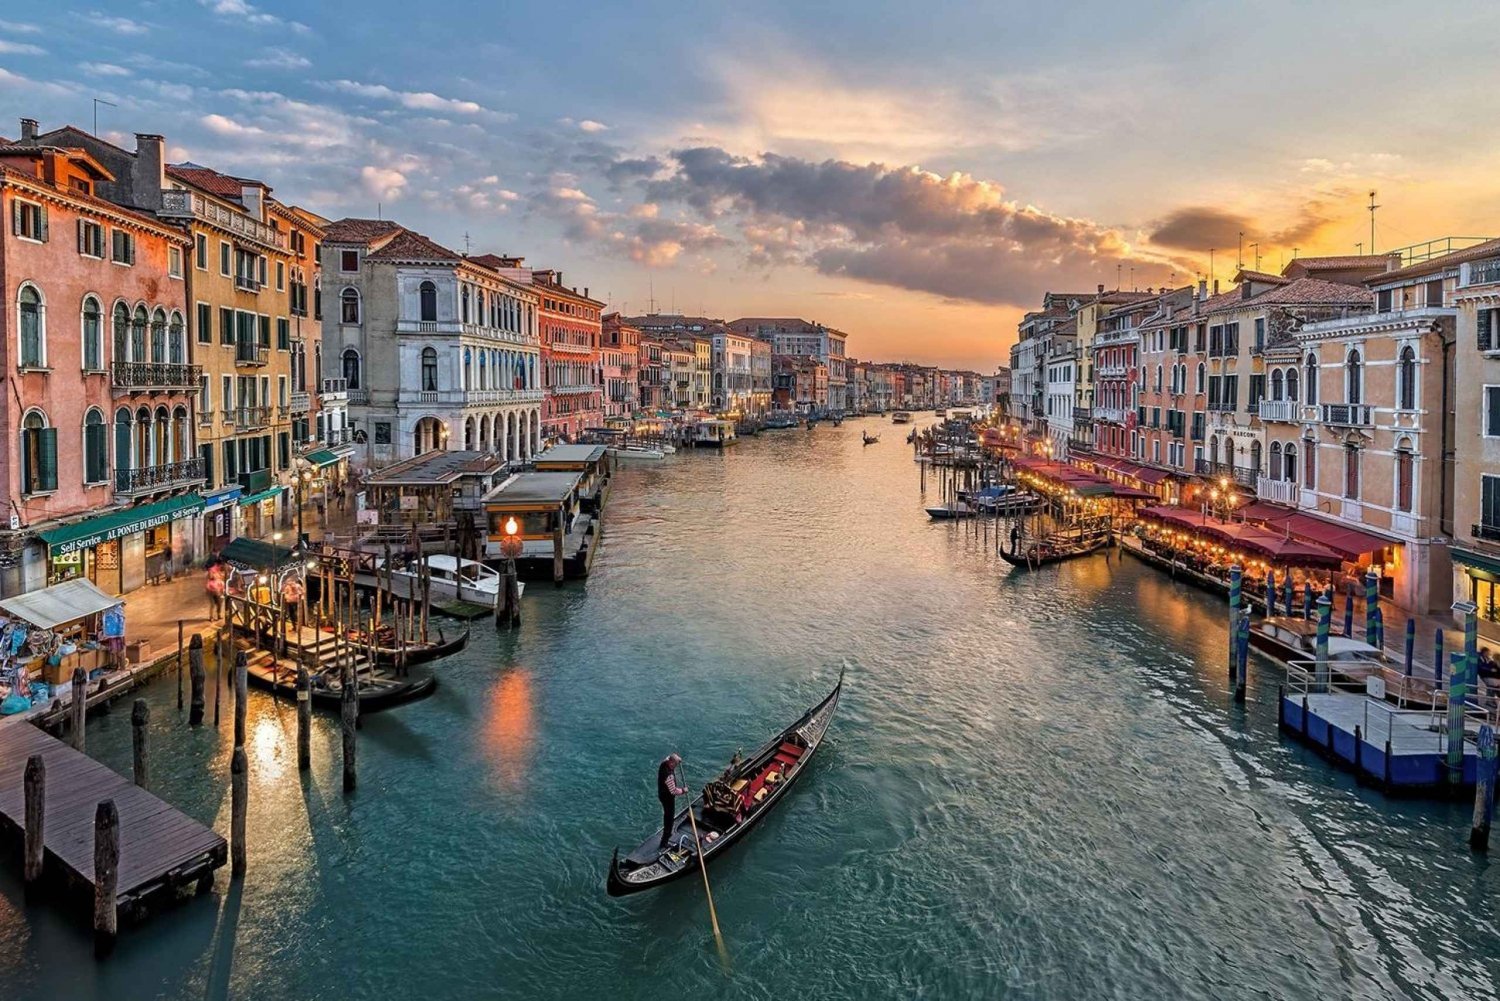 Discover Venice - Morning Walking Tour and Gondola